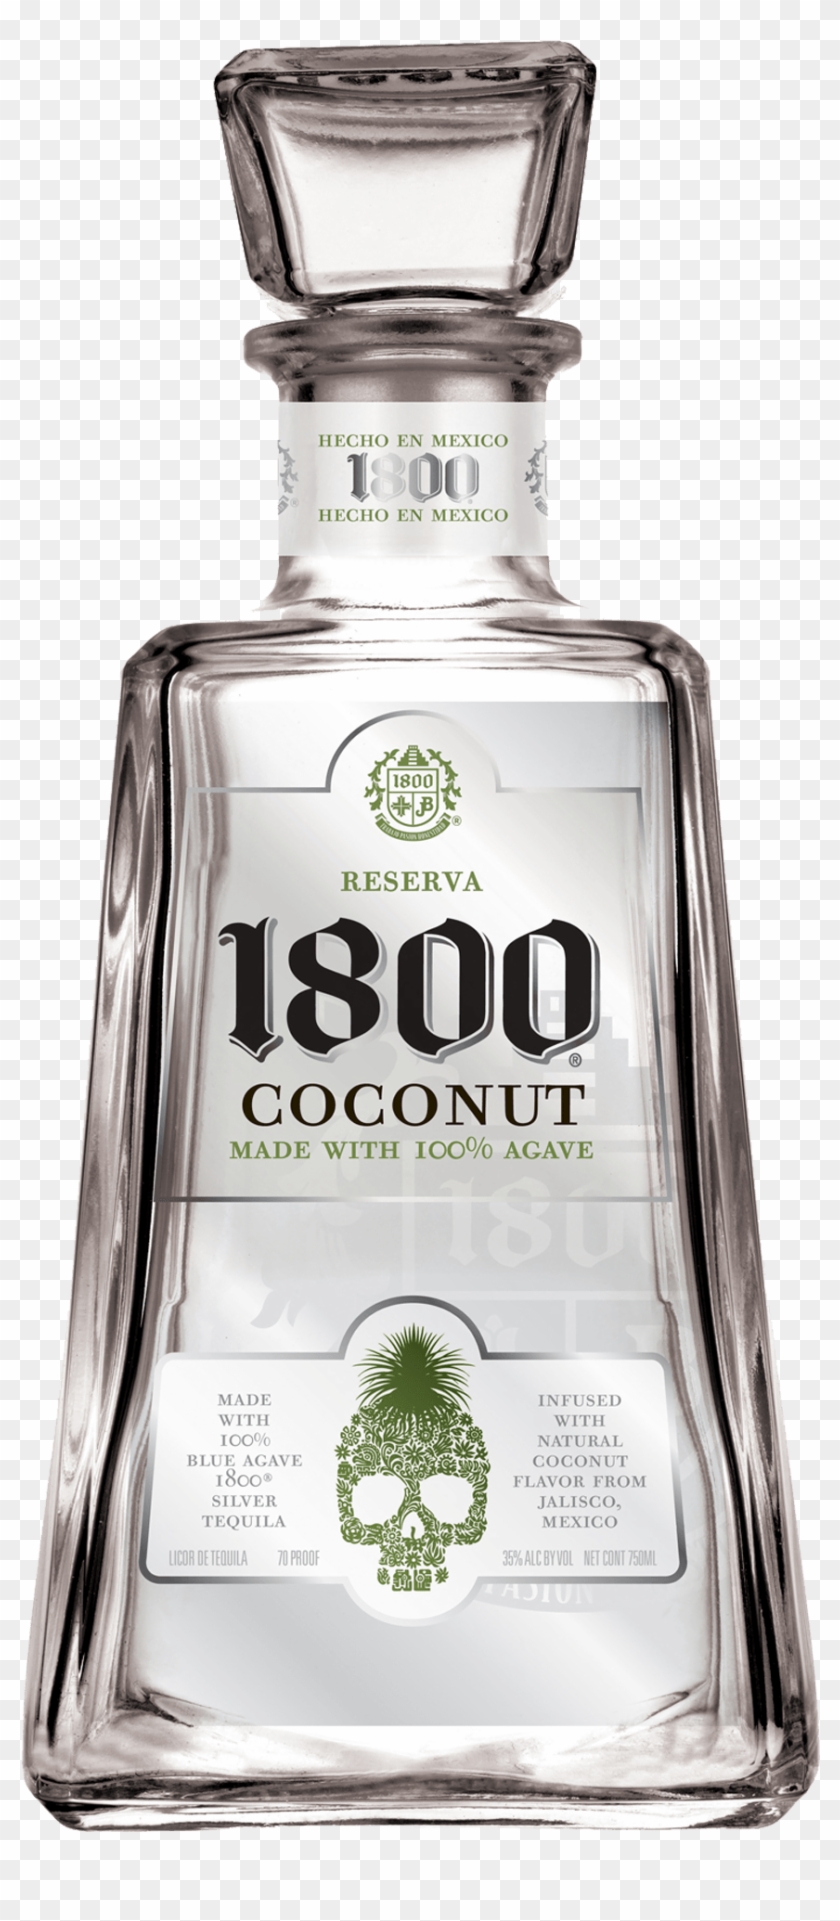 1800 Tequila Coconut Download 1800 Tequila Coconut - 1800 Coconut Tequila Sizes #901128